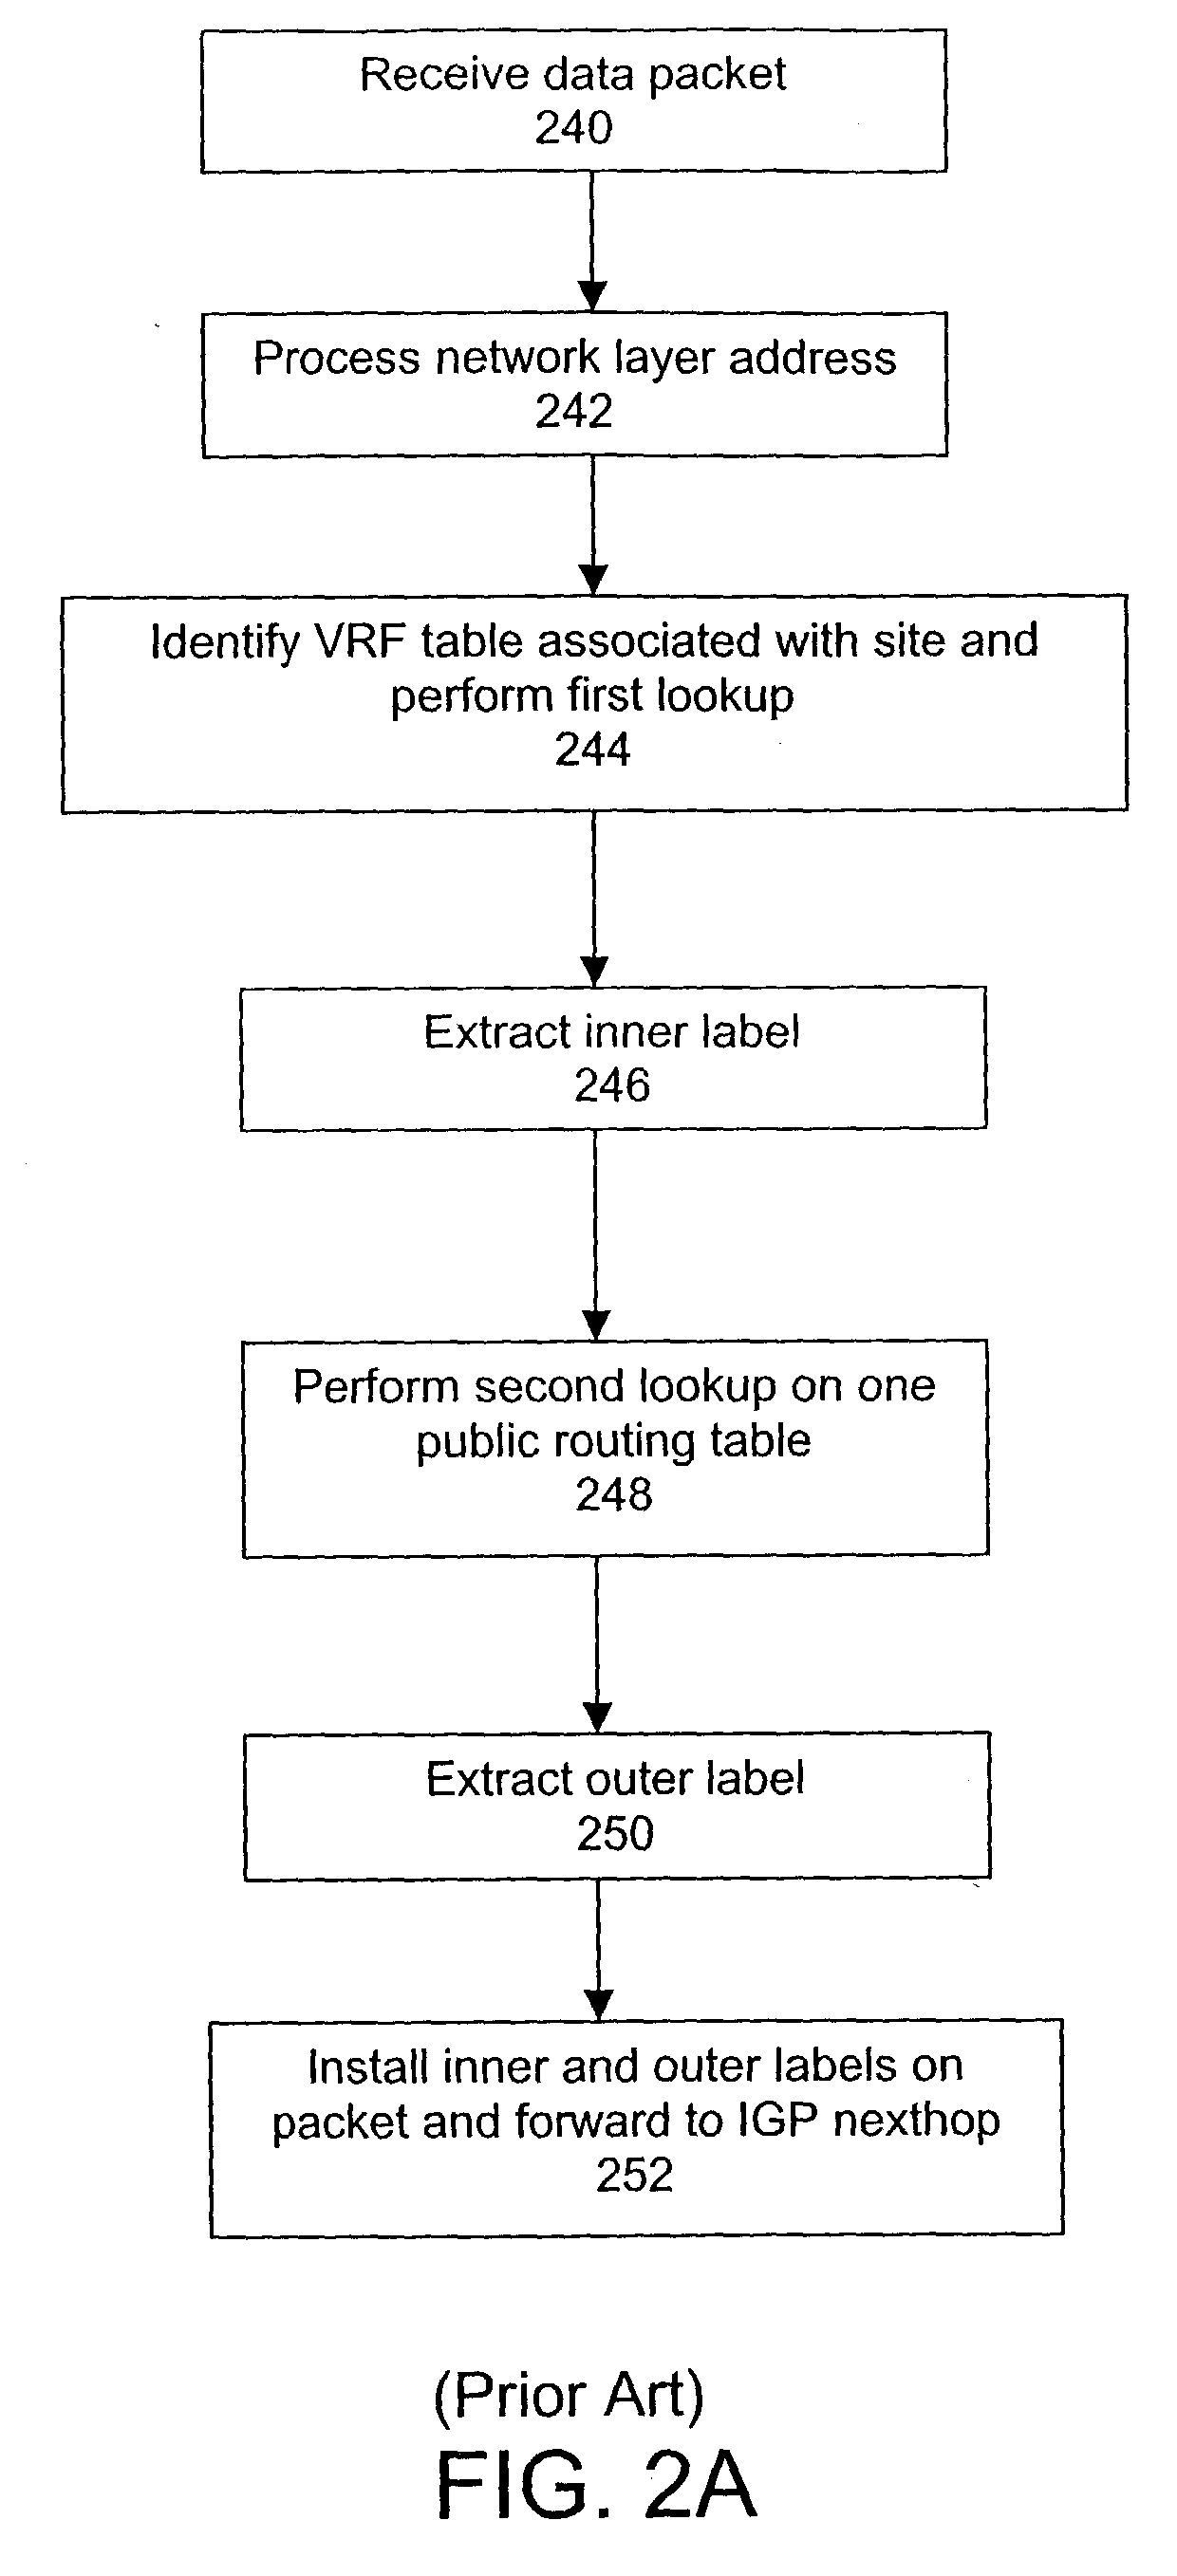 Method and system for supporting a dedicated label switched path for a virtual private network over a label switched communication network